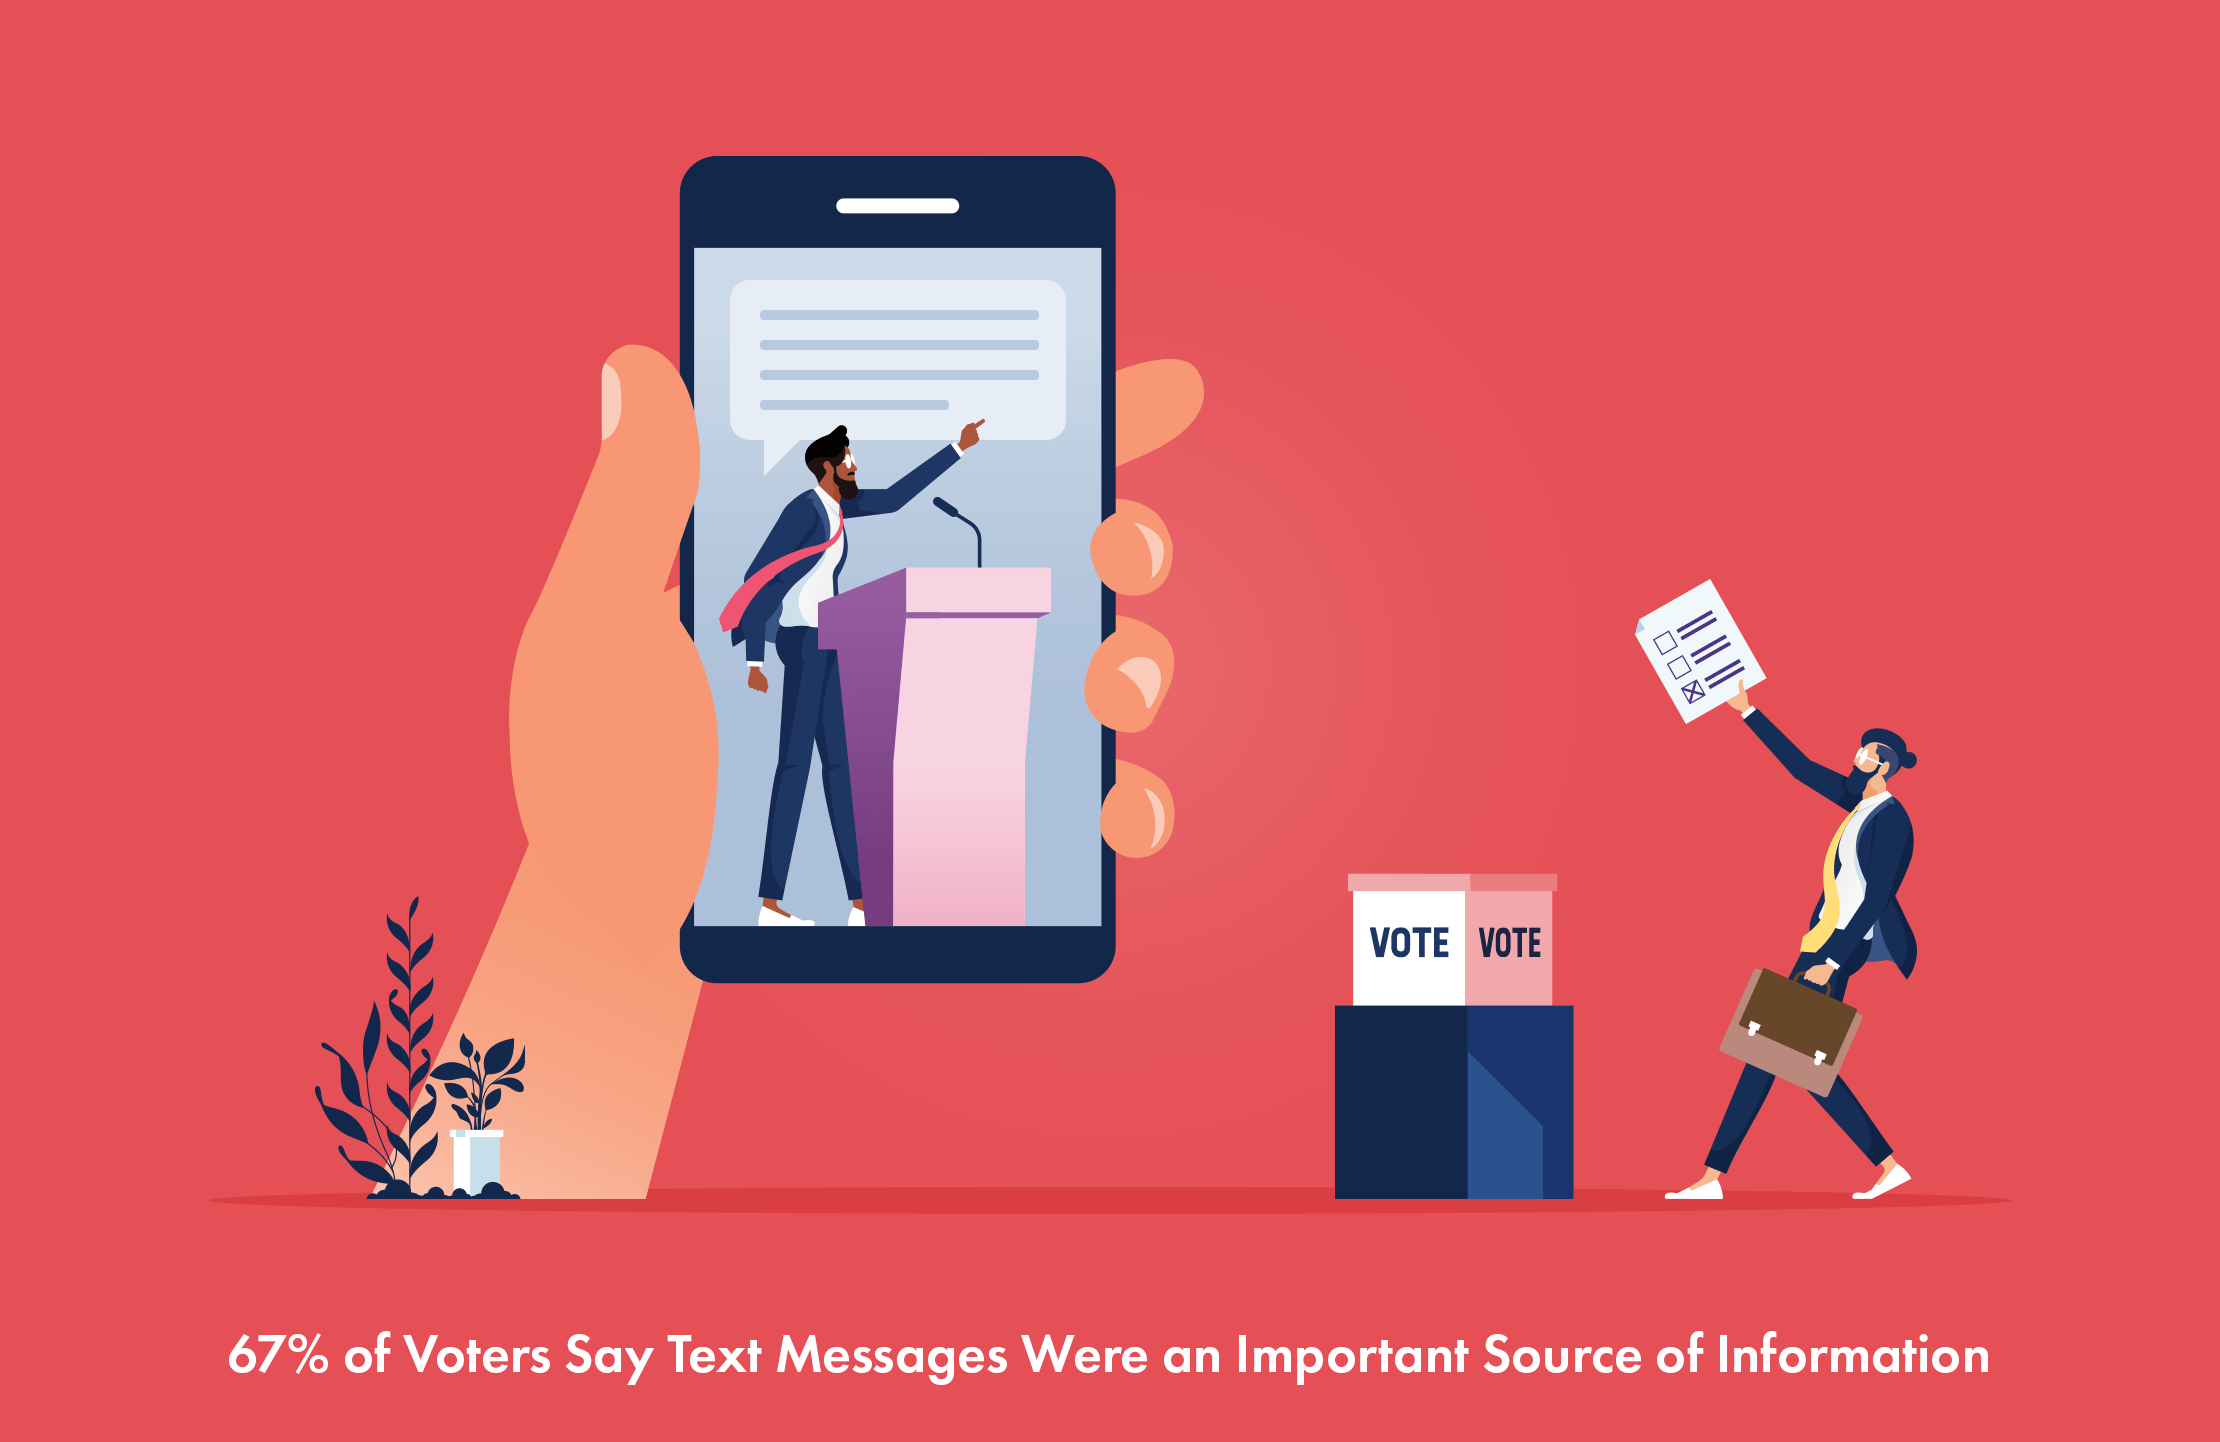 1 in 4 Voters Want Information Sent to Mobile 4